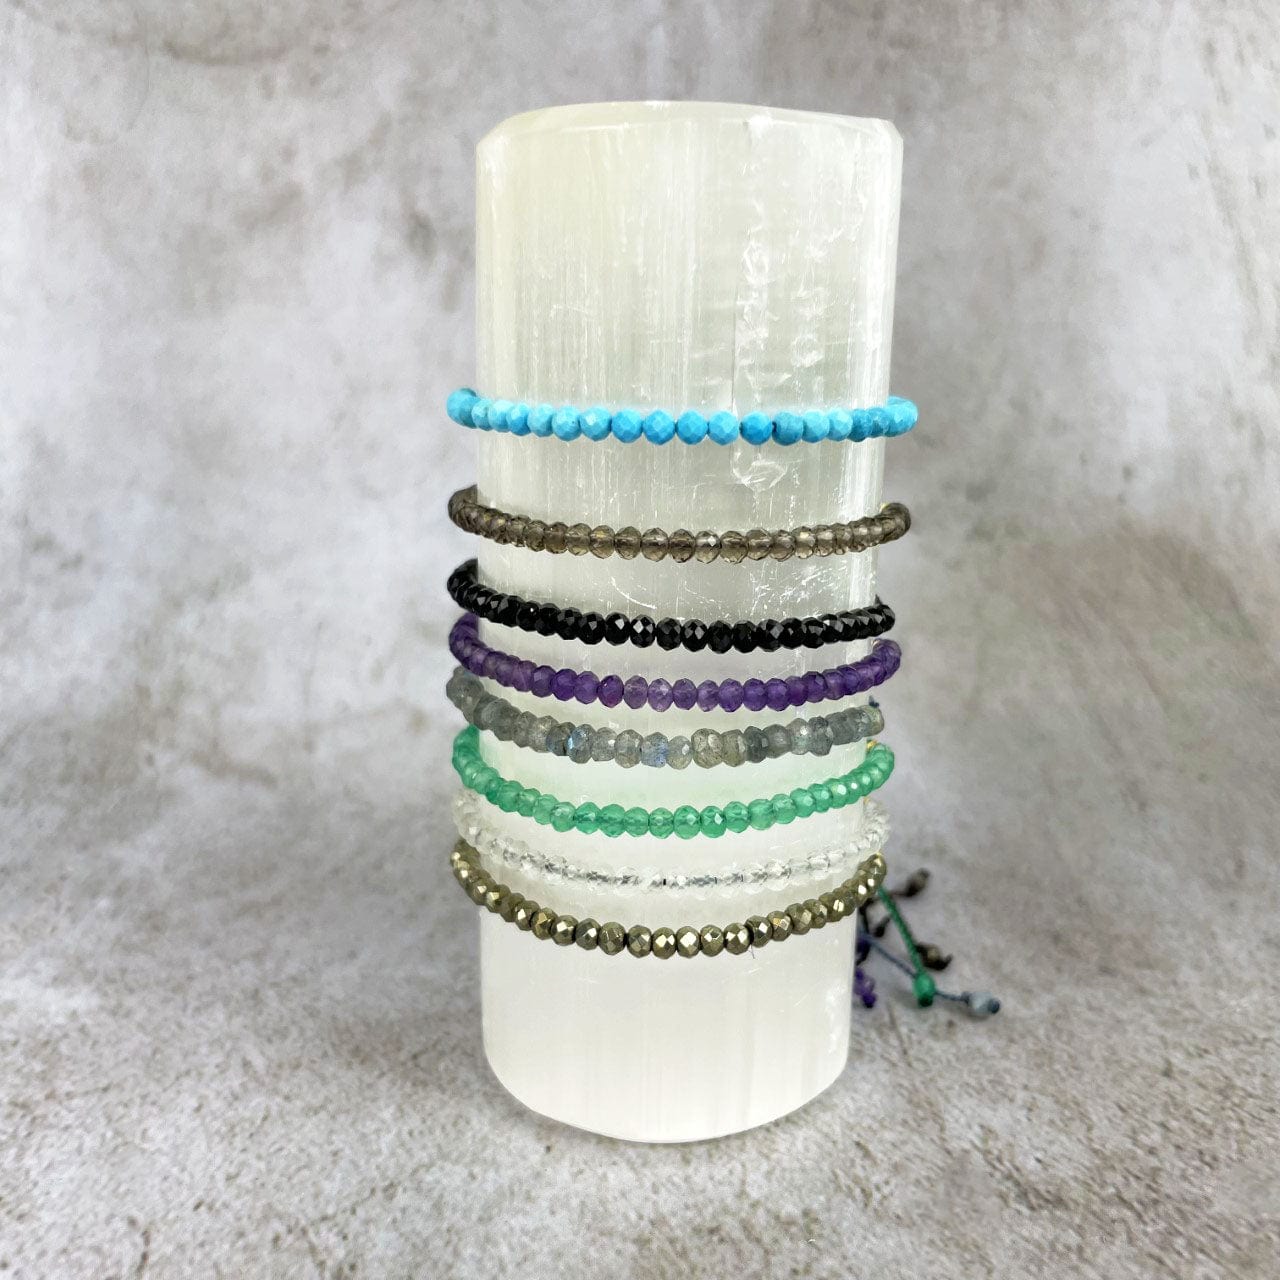 Gemstone Bracelet - Adjustable Cord with Gold Plated over Sterling Silver Beads one of each stone available, pyrite, moonstone, green onyx, labradorite, amethyst, black spinel, smoky quartz, and chinese turquoise on a stand